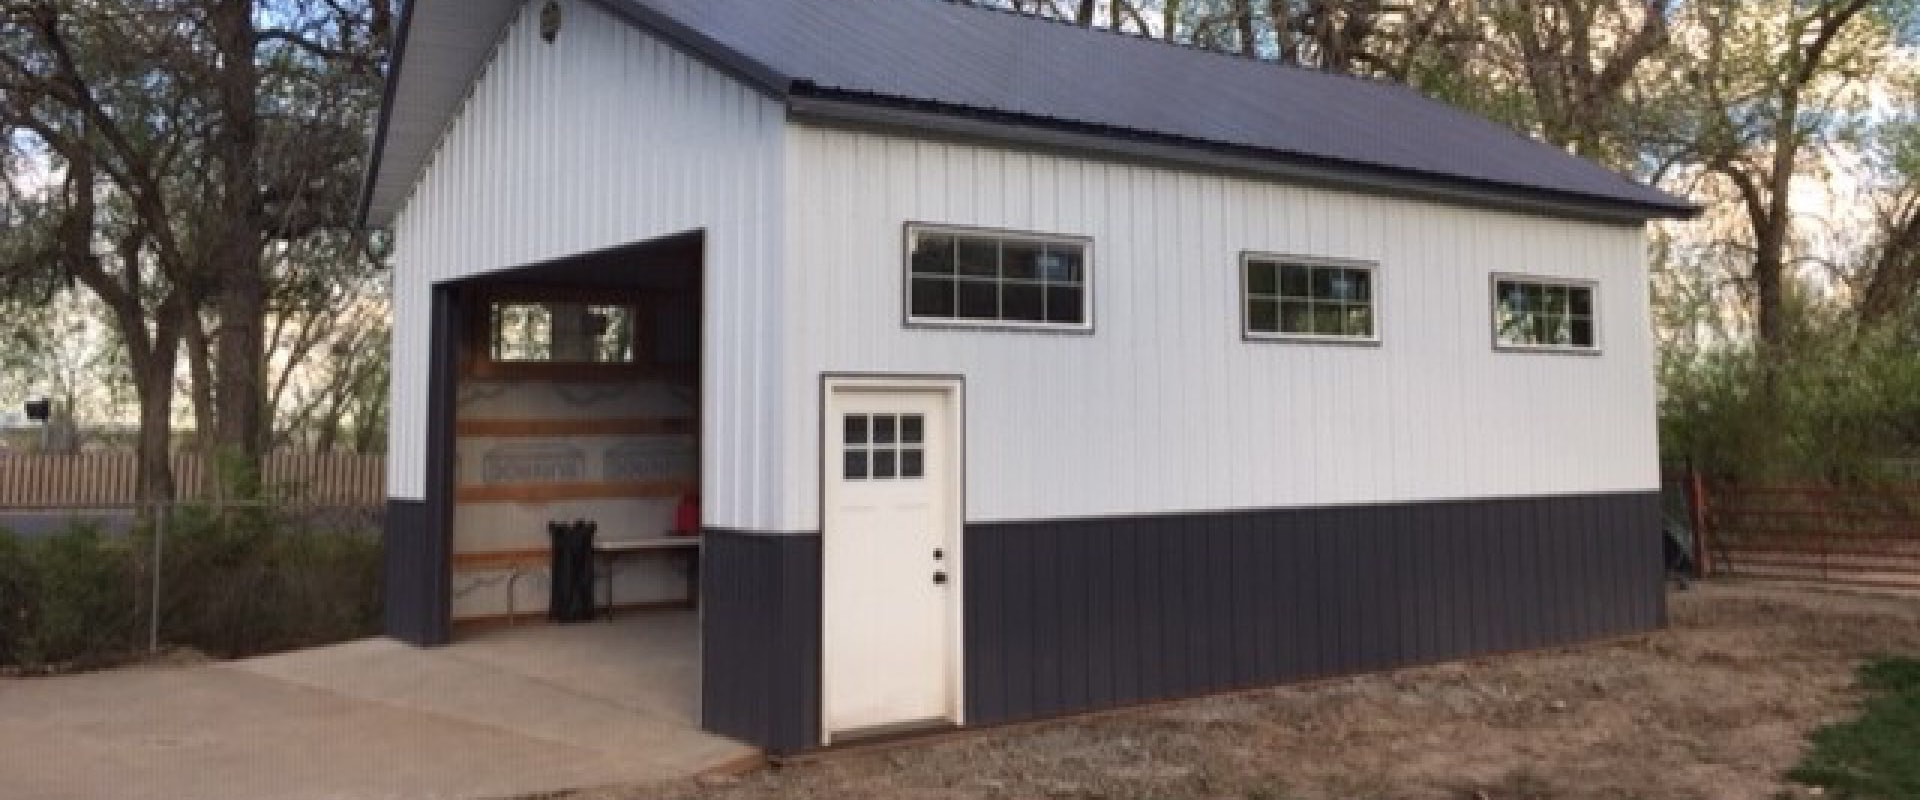 Which is better pole barn or steel building?